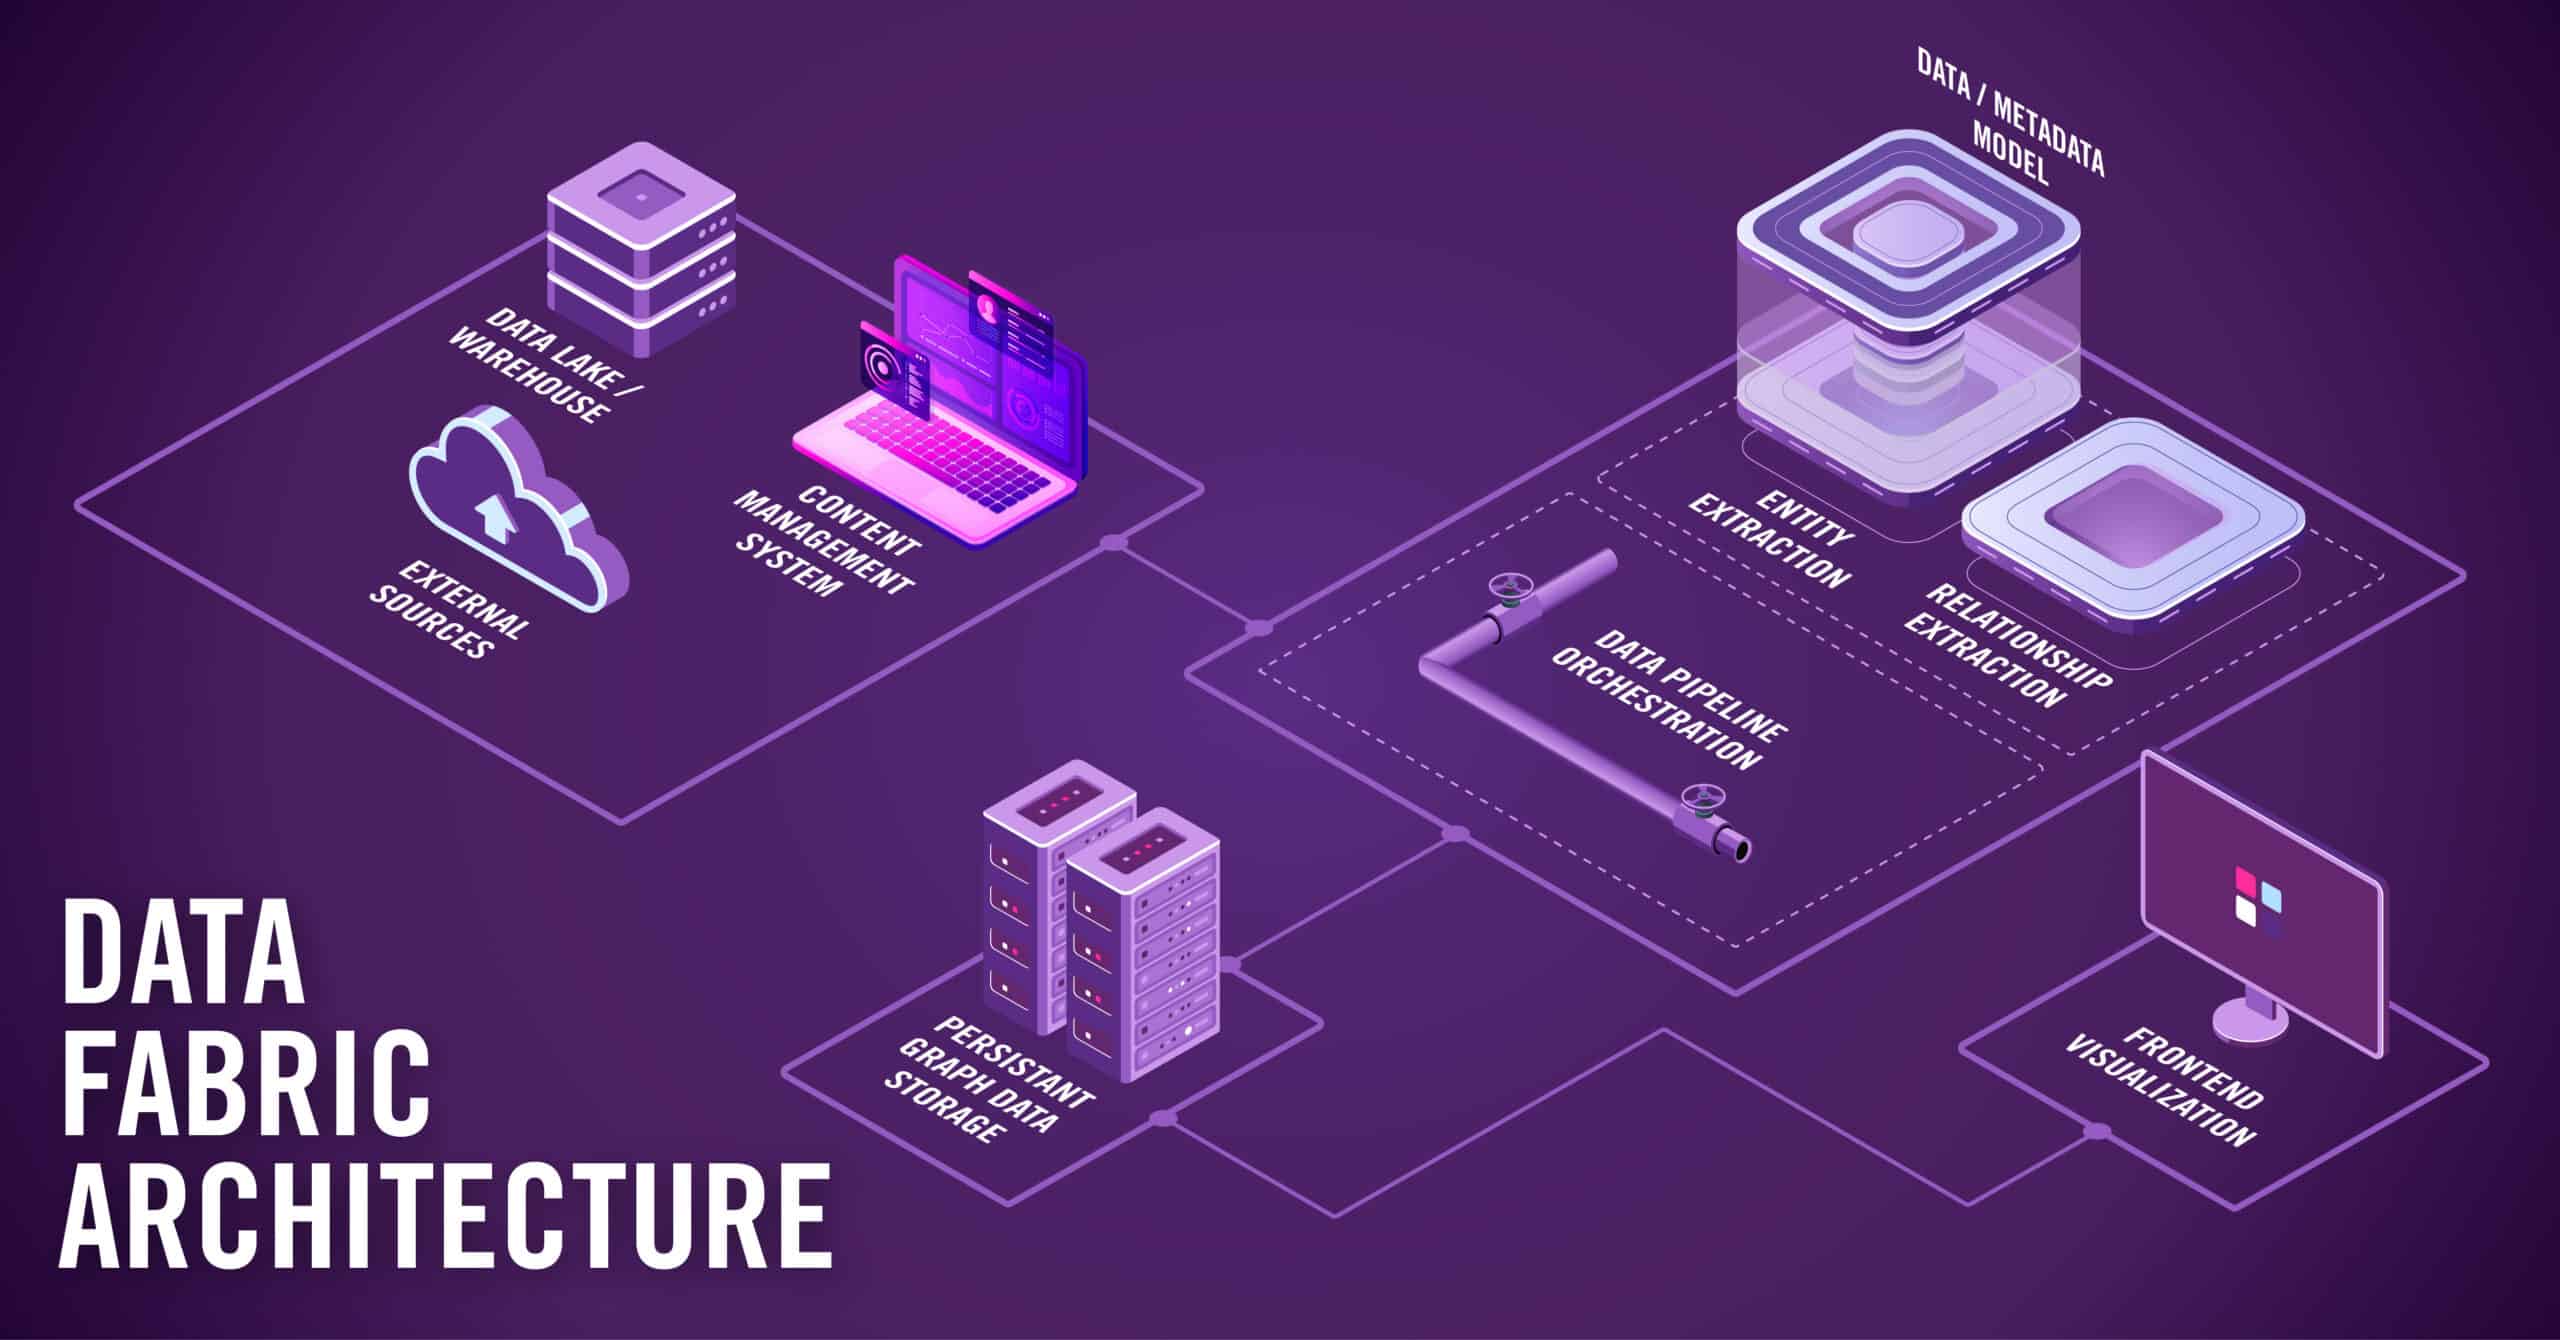 Components of the data fabric architecture